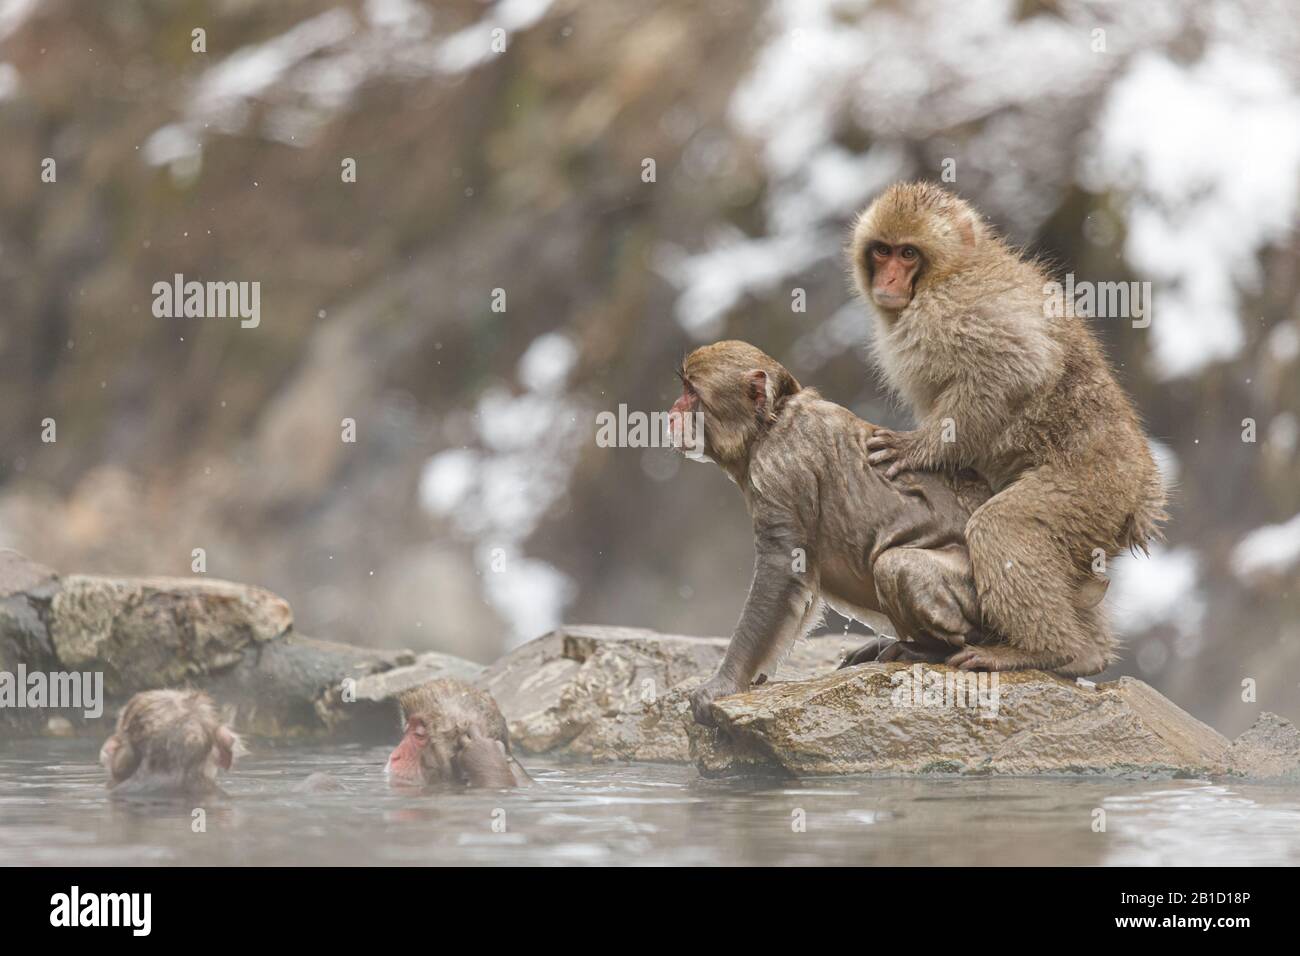 Shimotakai Gun, Japan. 23rd Feb, 2020. Japanese macaques enjoy a hot  spring.Jigokudani Yaen-koen was opened in 1964 and it's known to be the  only place in the world where monkeys bathe in